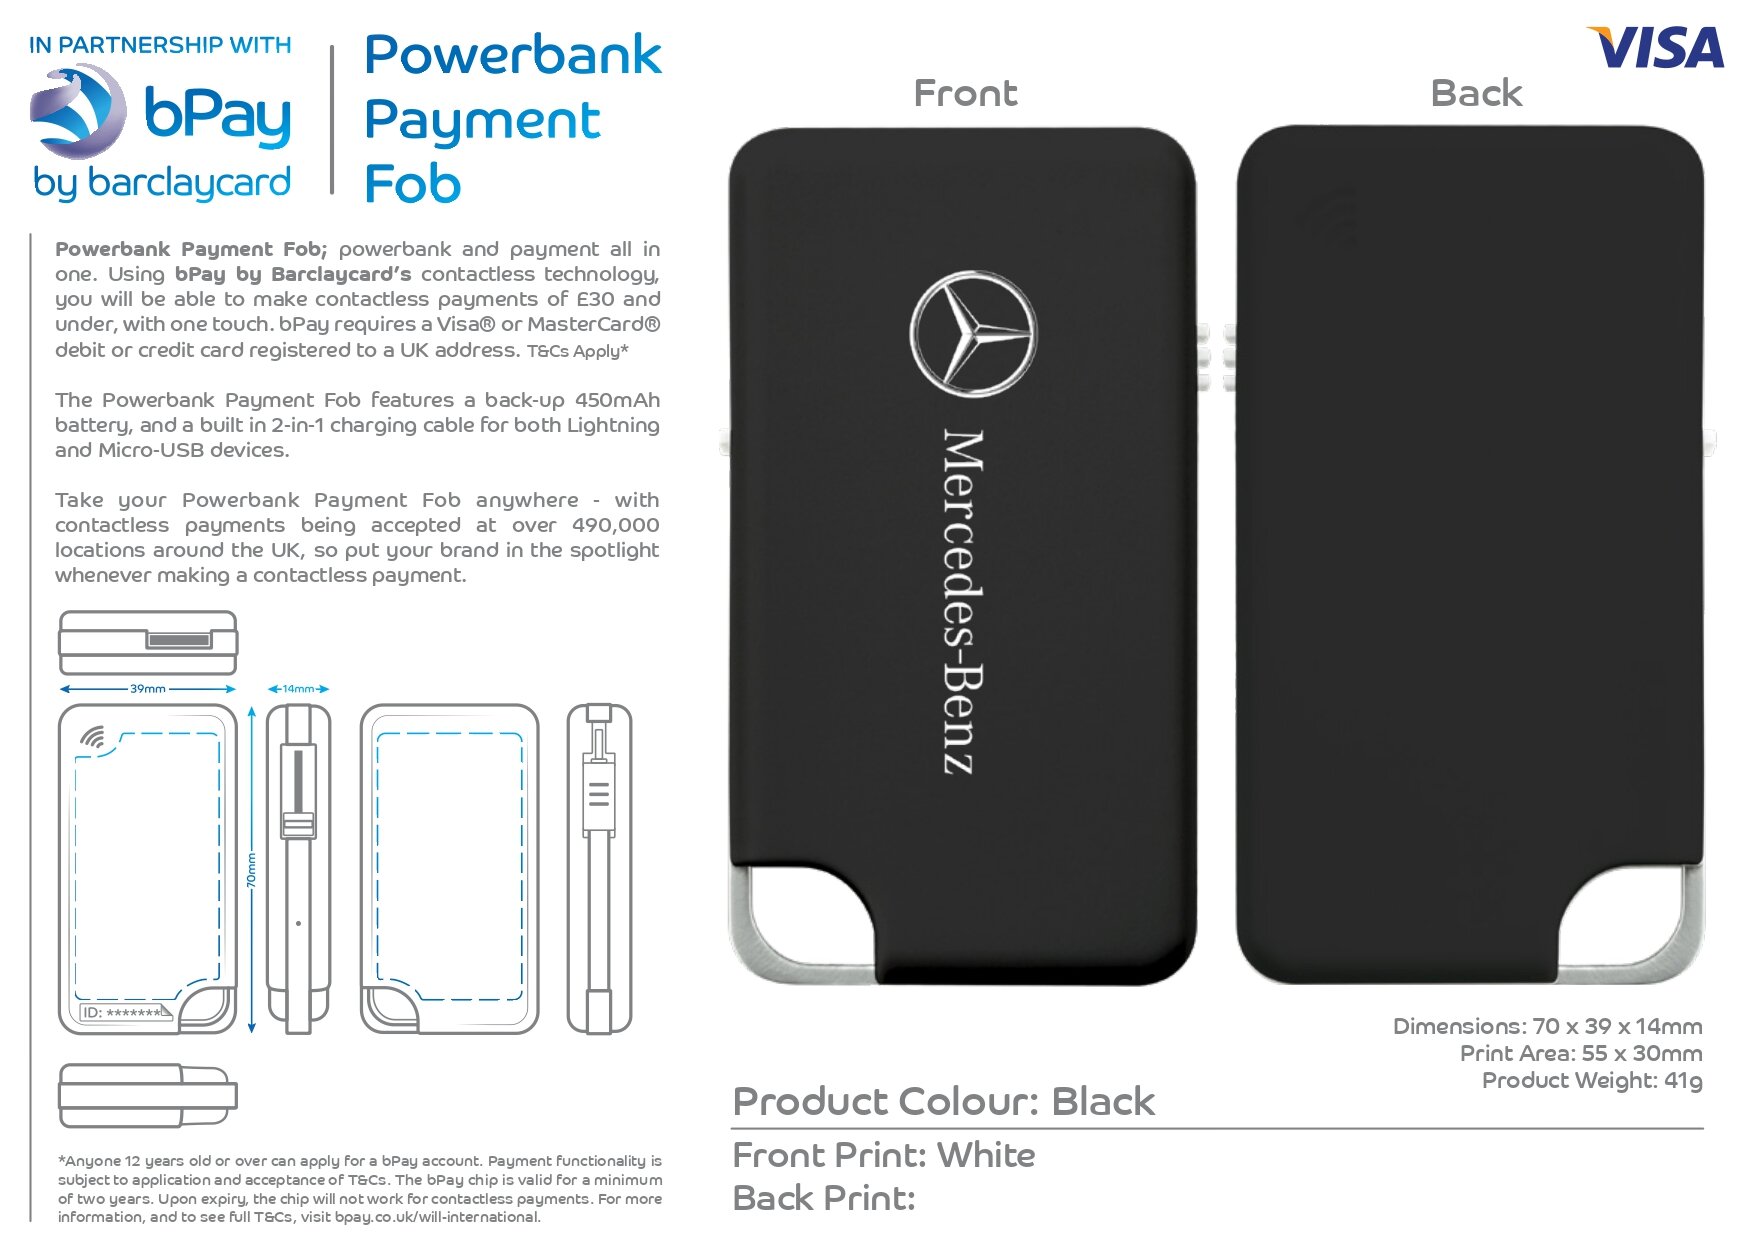 Mercedes Benz bPay Powerbank Payment Fob Visual Template Black_page-0001.jpg